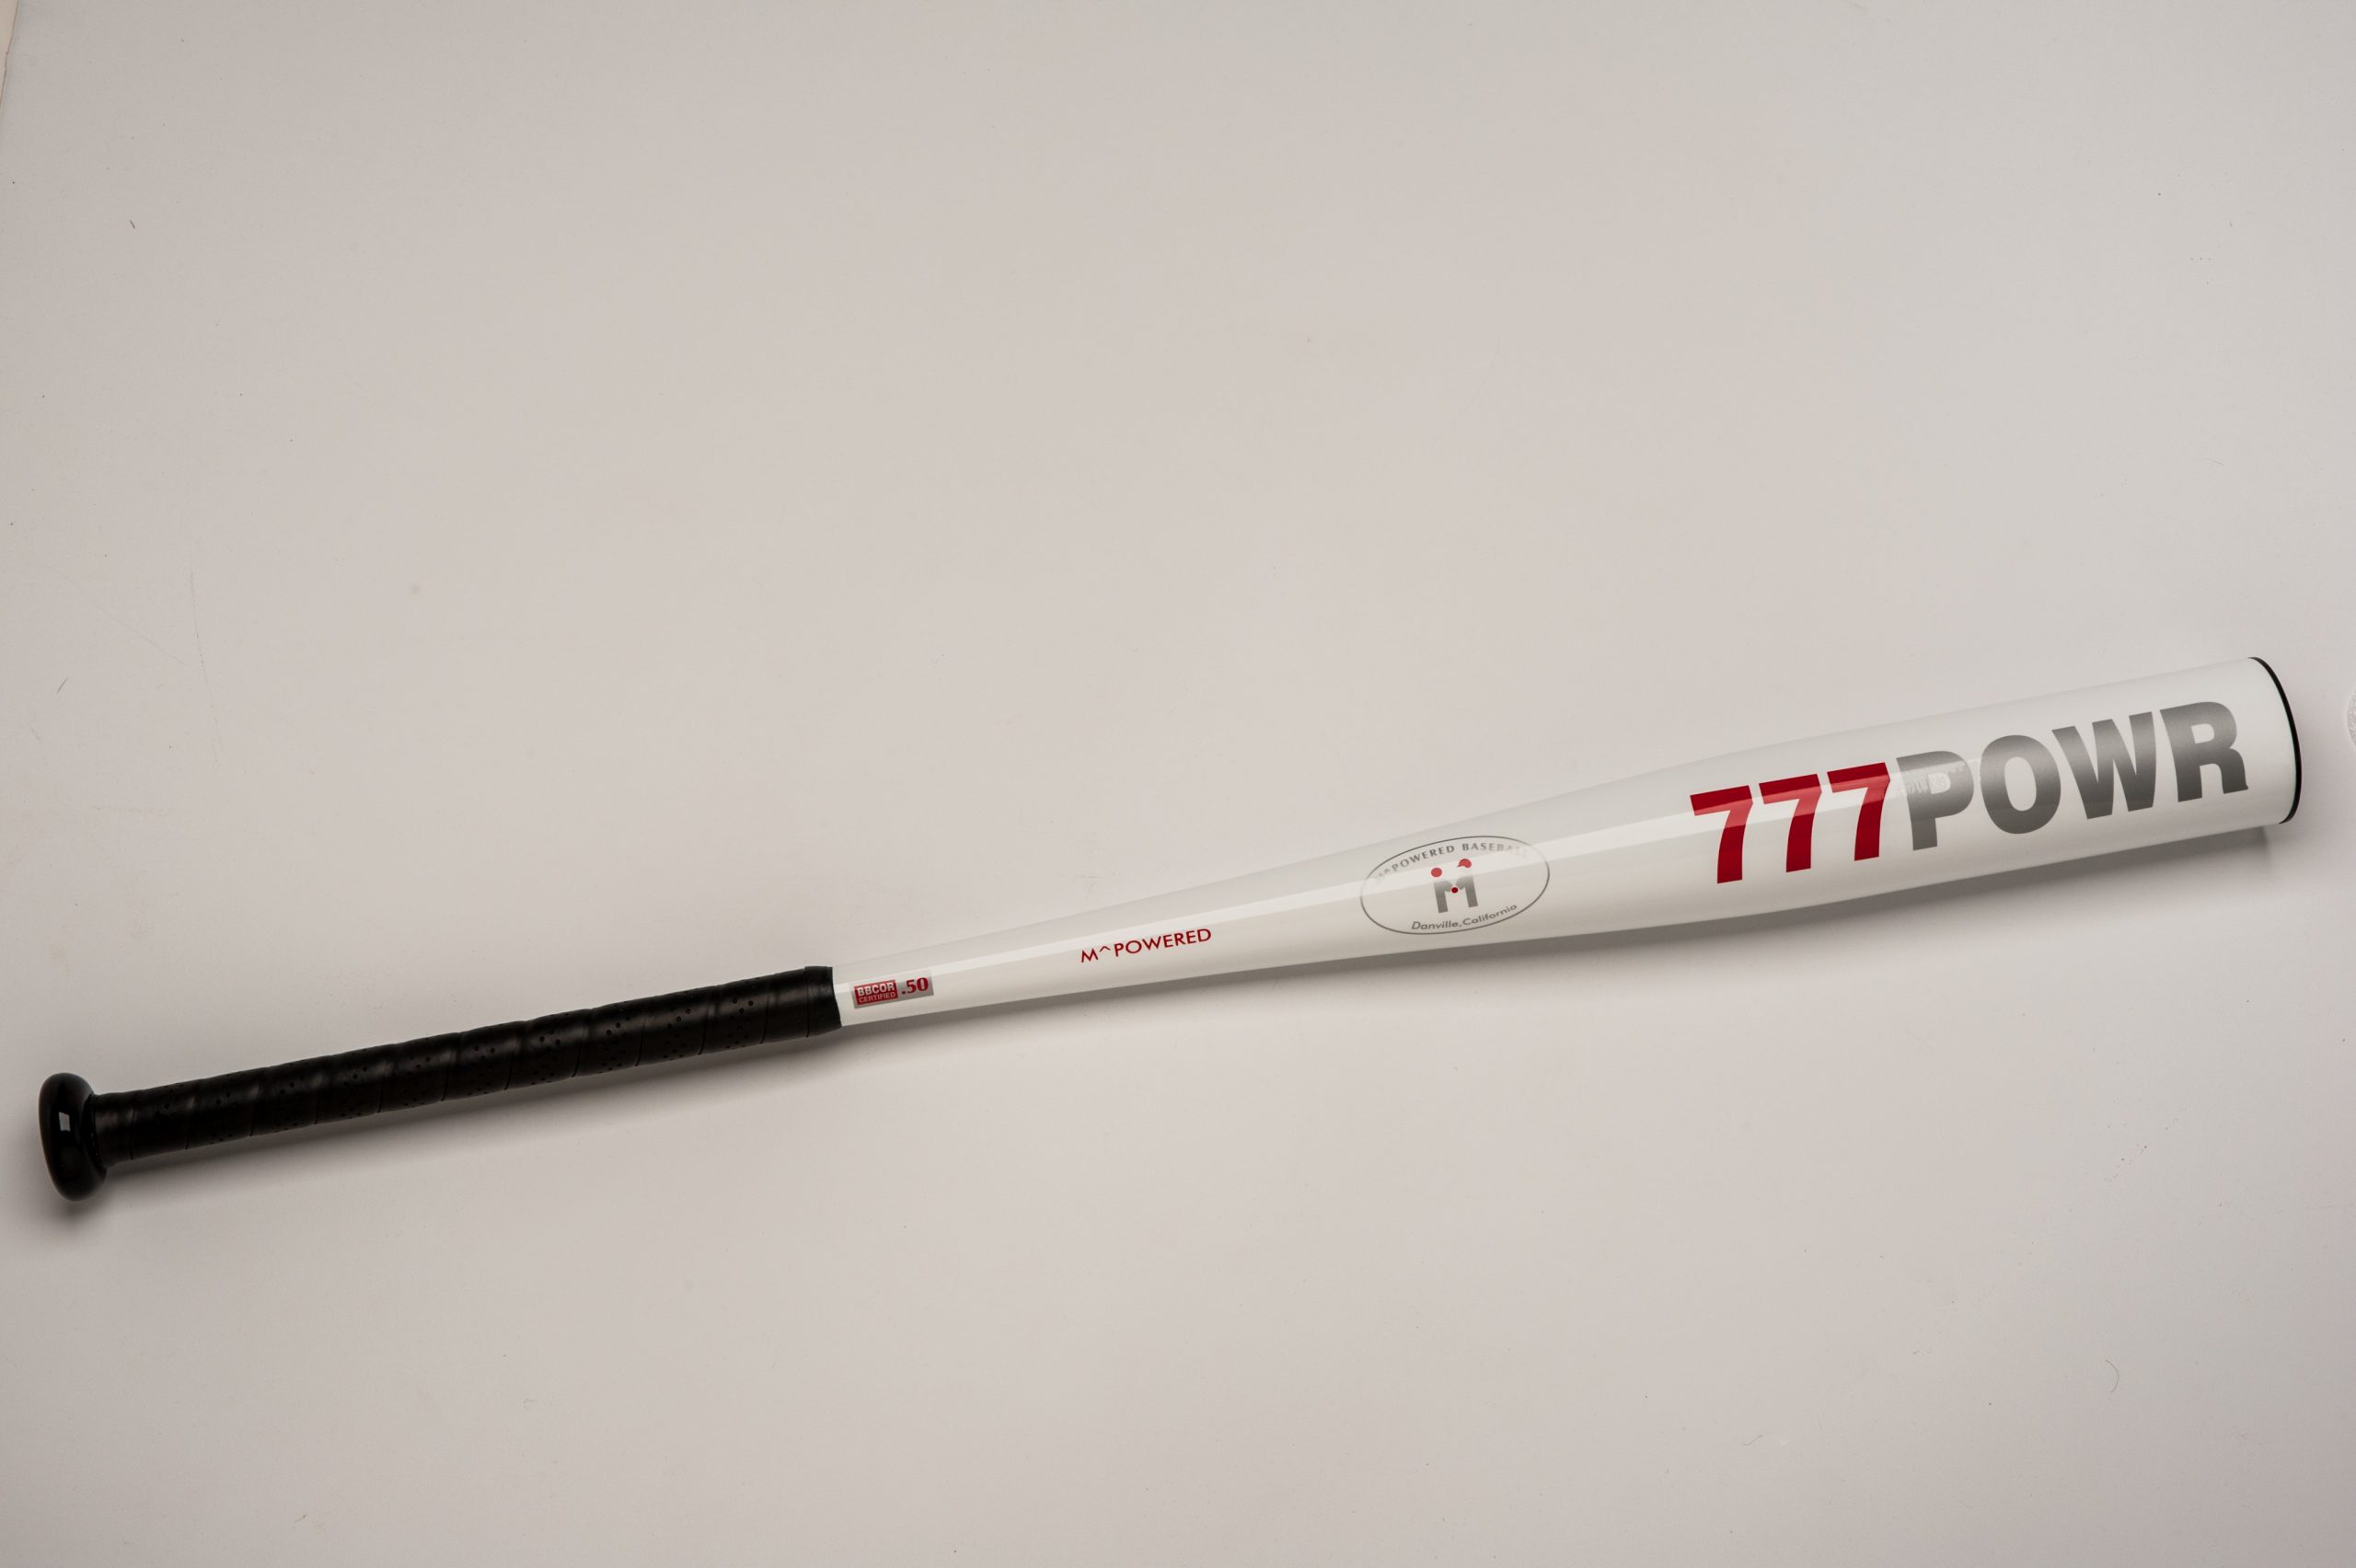 *NEW* M^POWERED BASEBALL WHITE  777POWR BBCOR ALLOY BAT  HS and COLLEGE APPROVED 